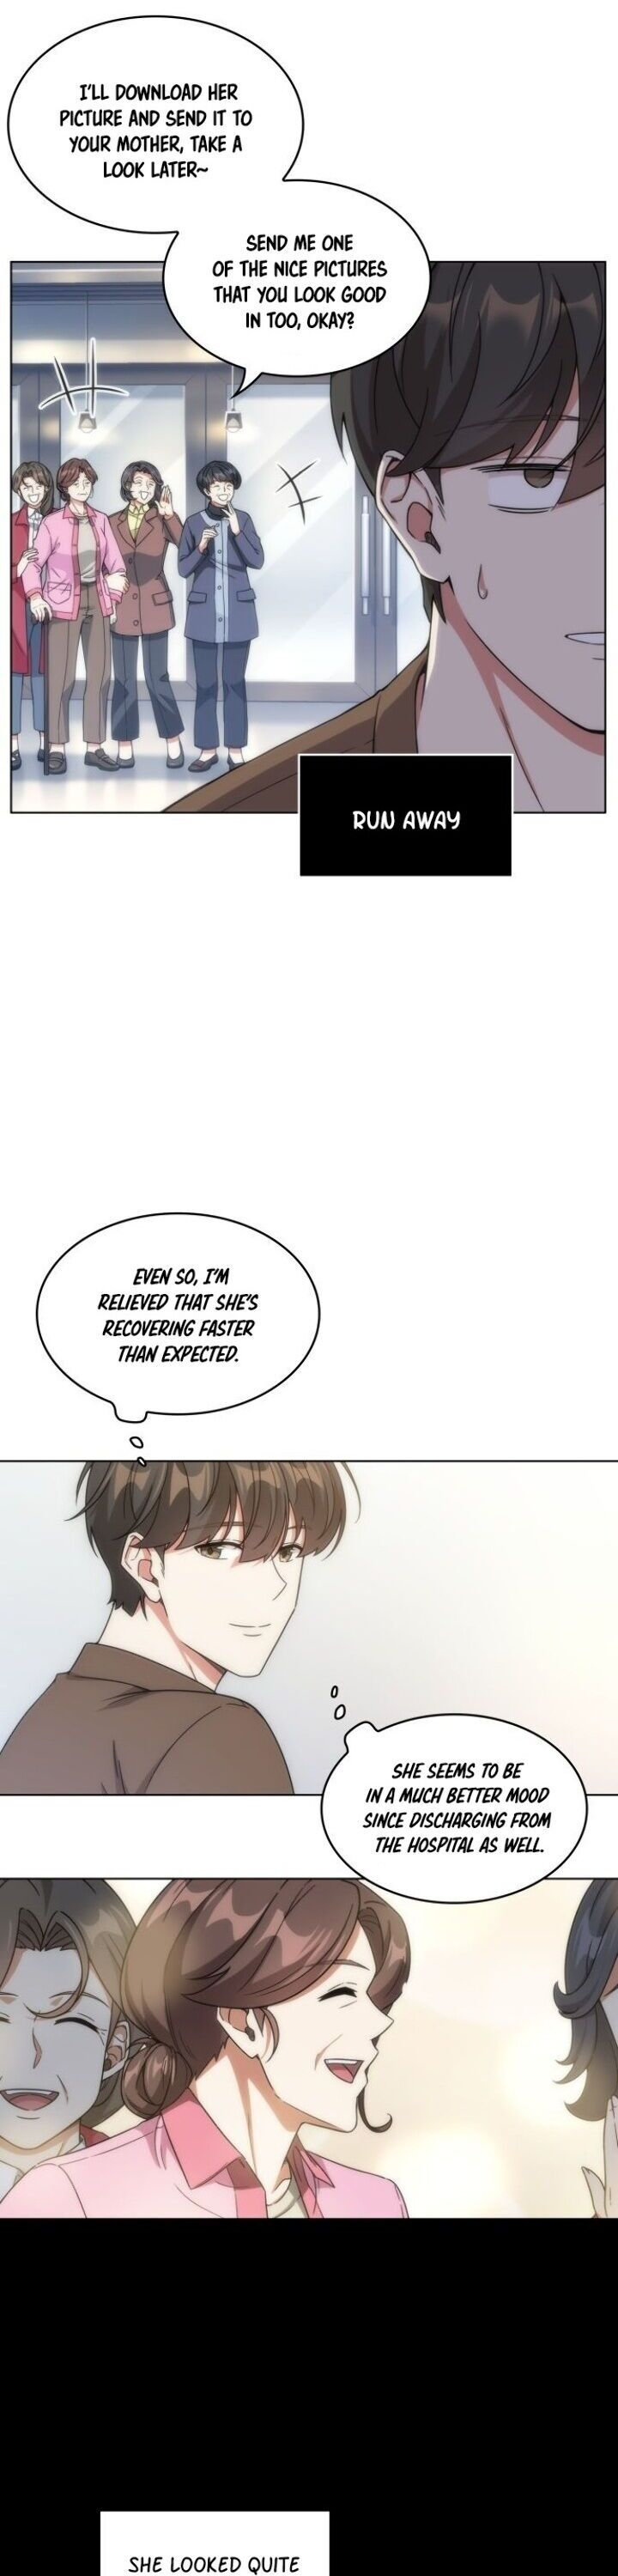 My Office Noona’s Story - Chapter 32 Page 3